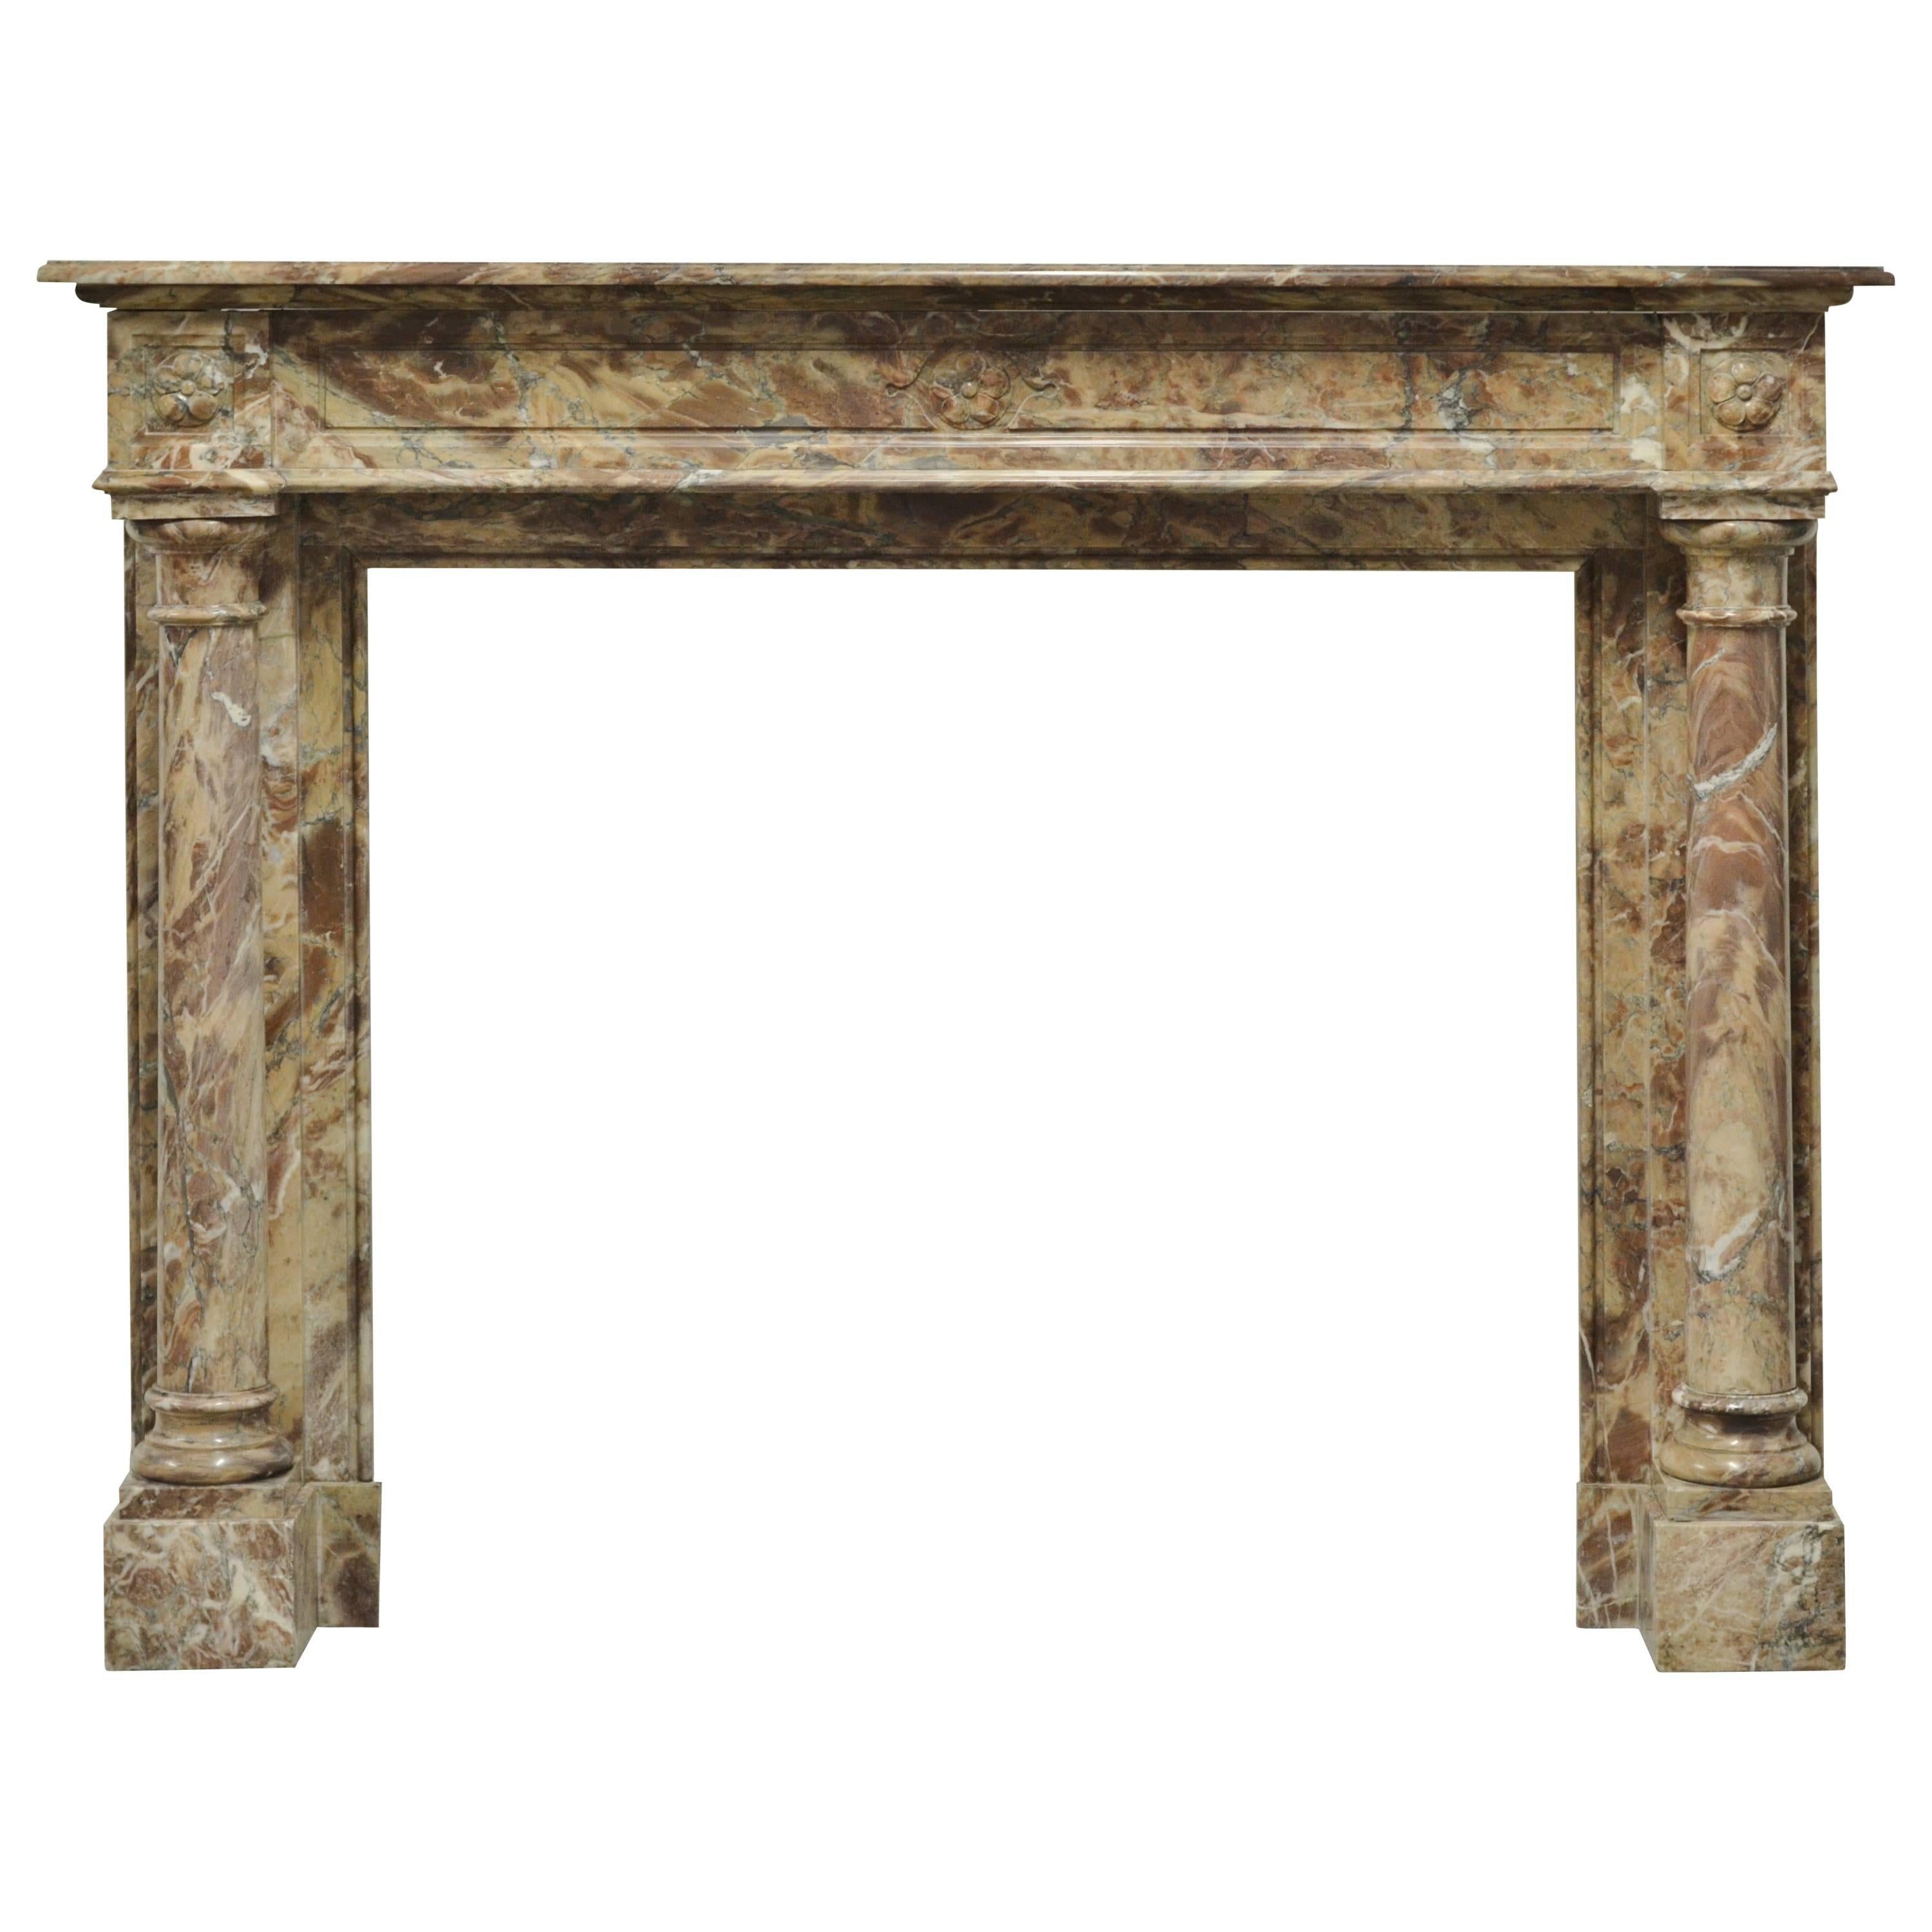 19th Century French Marble Louis XVI Fireplace Mantel with Pillars